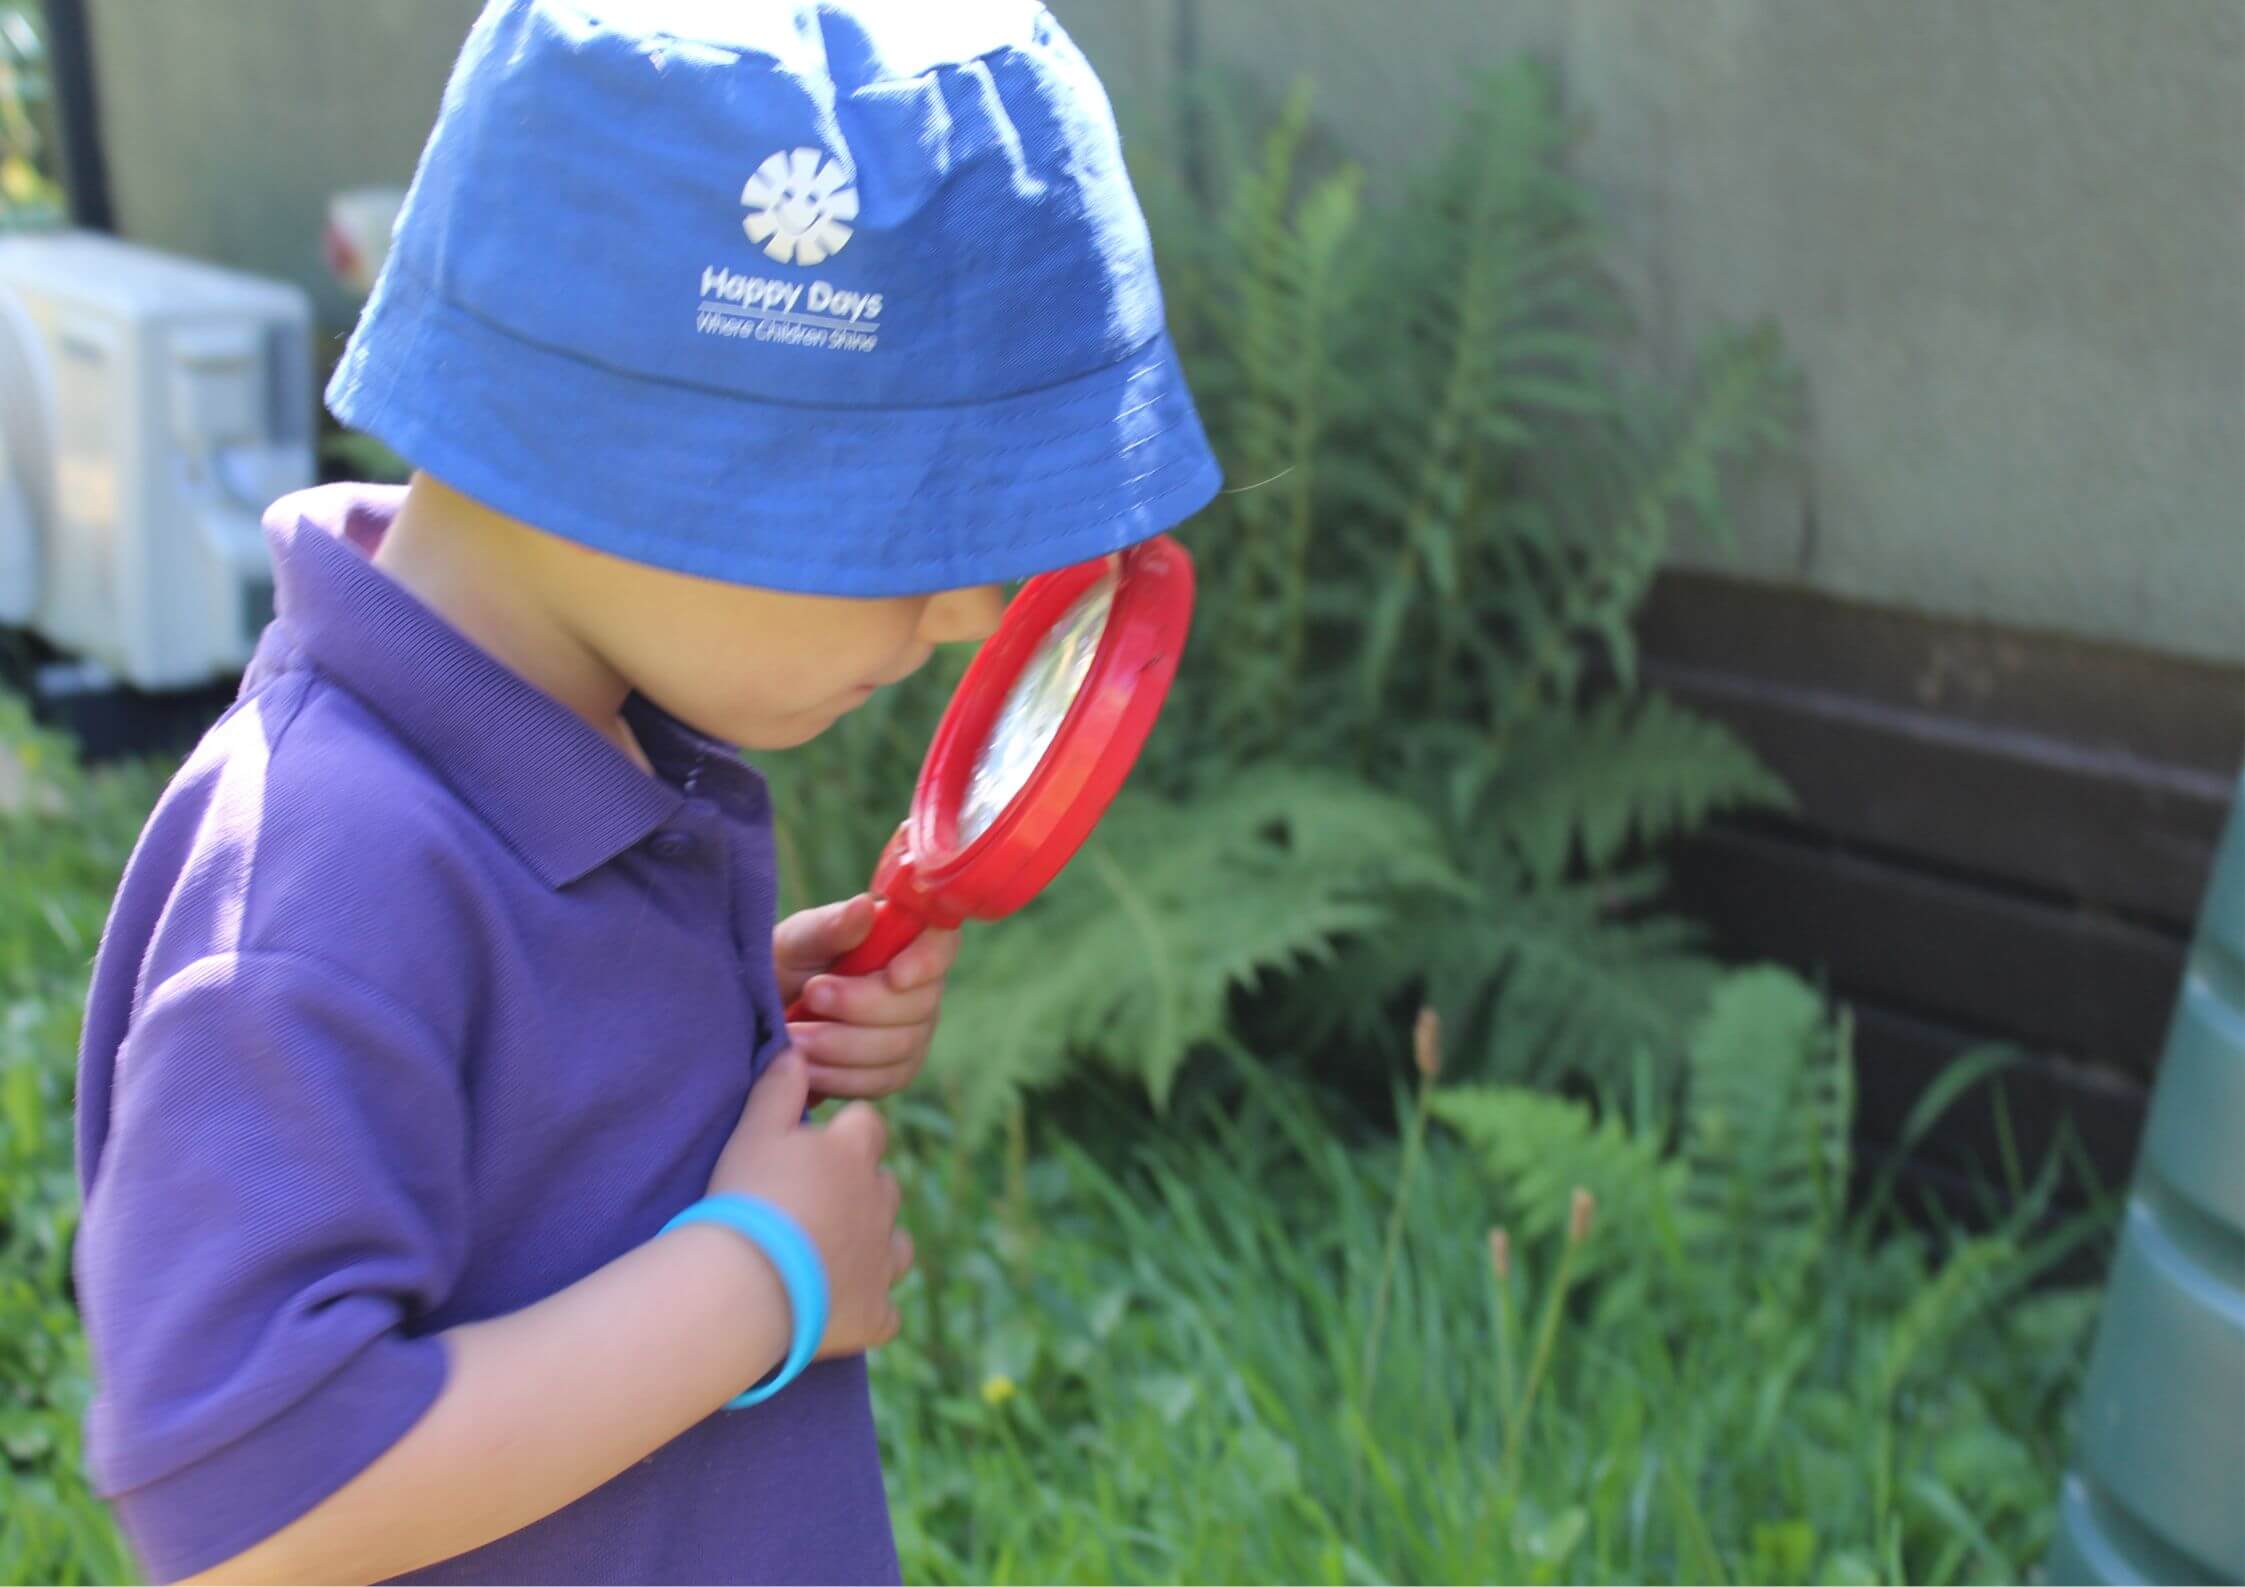 Child exploring outdoors with magnifying glass